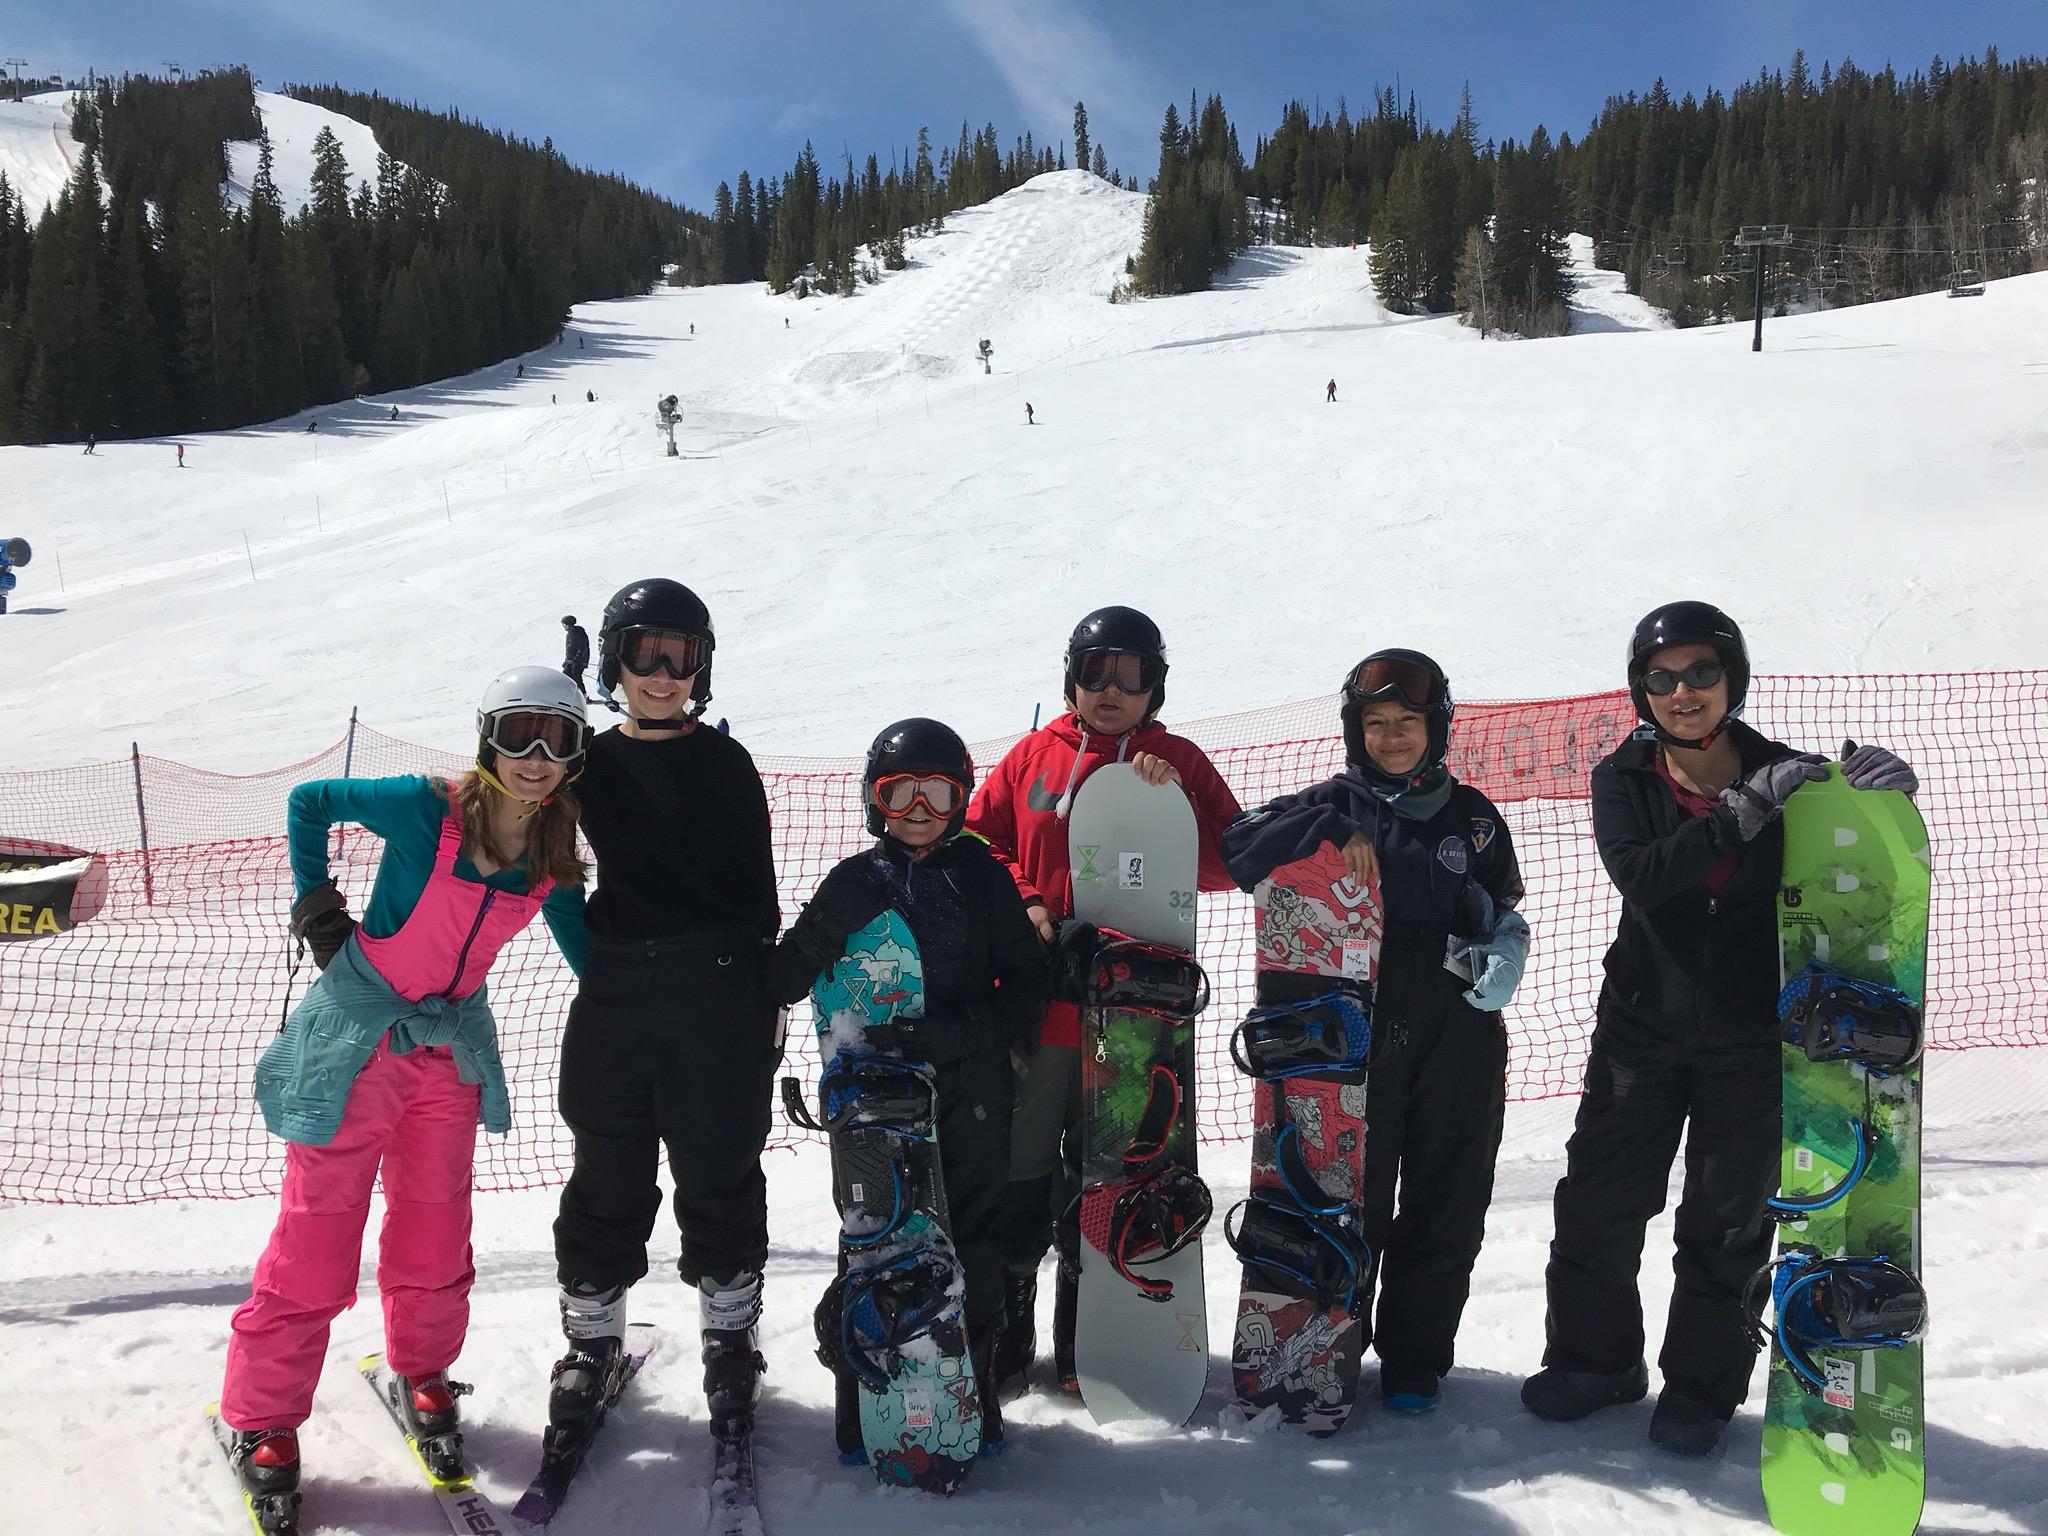 A group of kids pose with their snowboards in front of a ski hill.